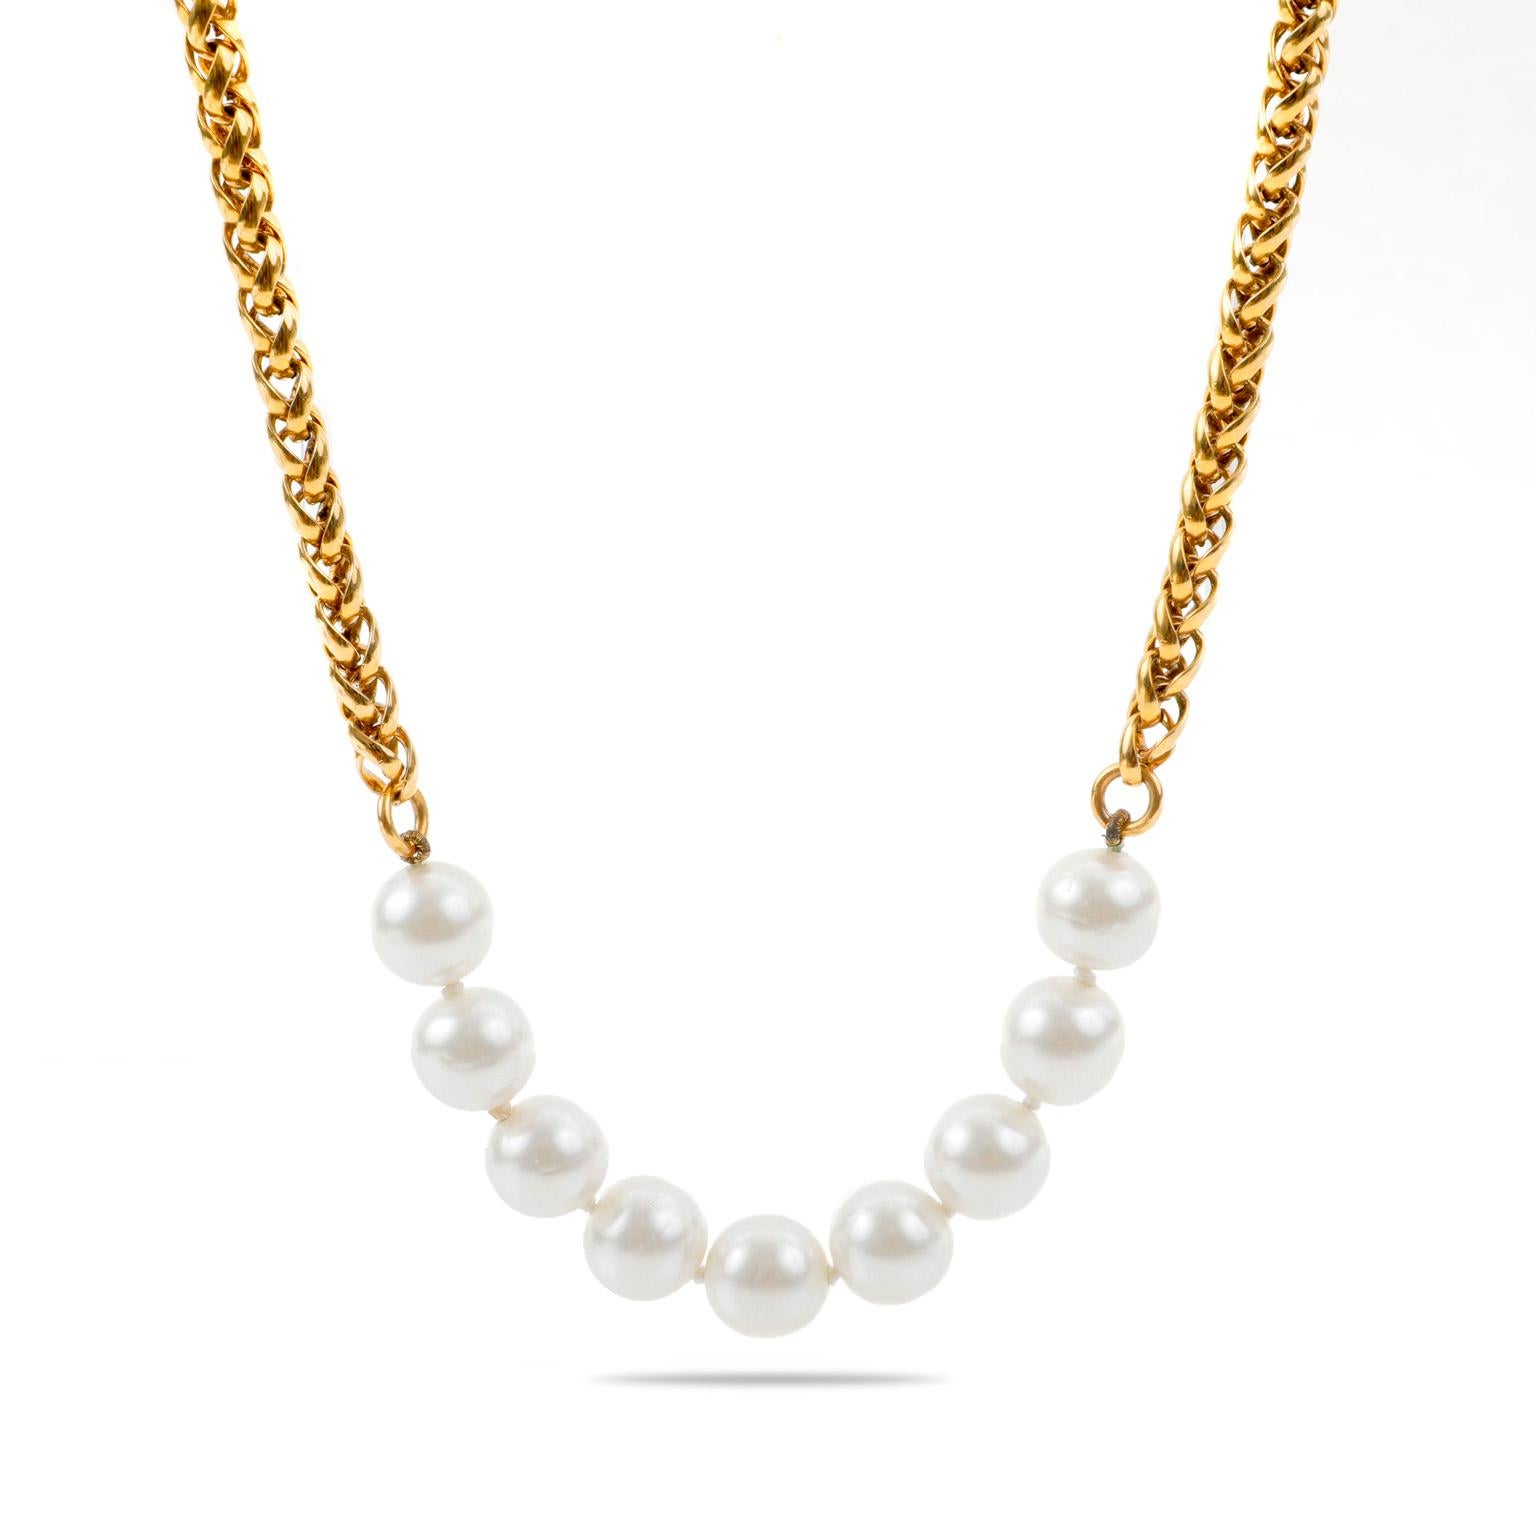 This authentic Chanel Pearl Station Necklace is in excellent vintage condition from the early 1980’s.  Three sections of faux white pearls are stationed along a gold tone wheat style chain.  Made in France.  Pouch or box included.

SKU 831/ 11204